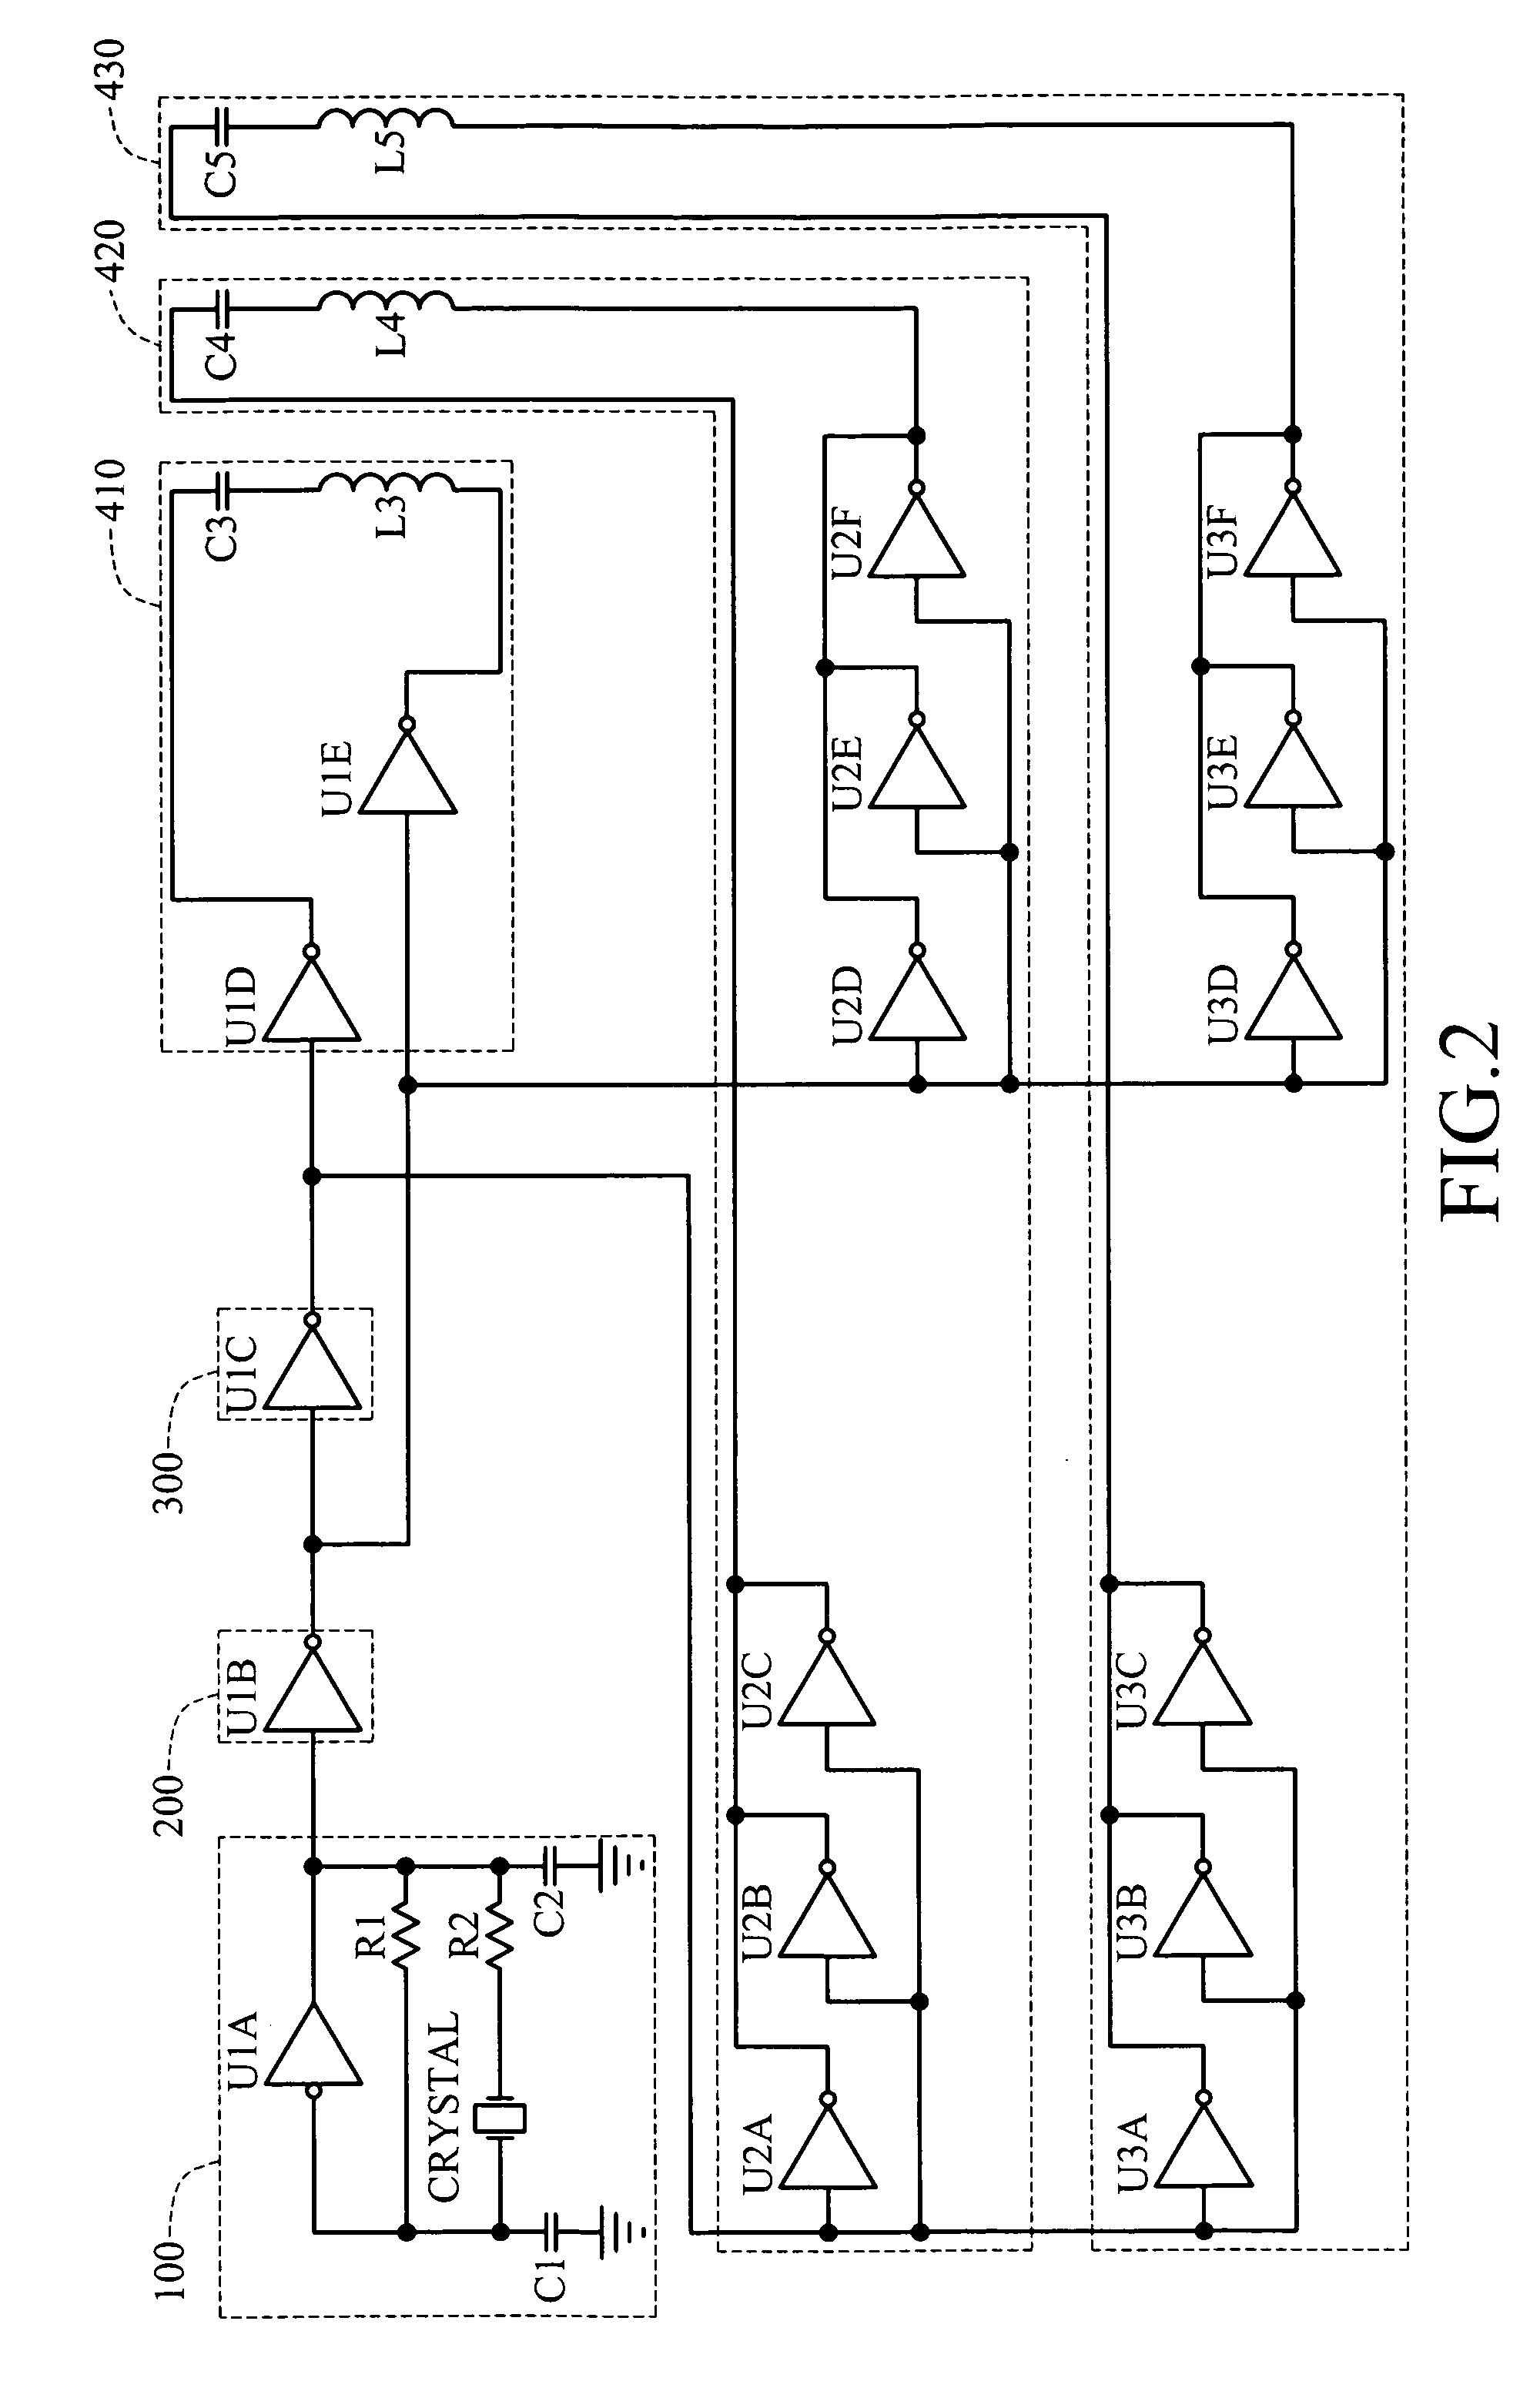 Magneto-electric-induction conversion system of wireless input device